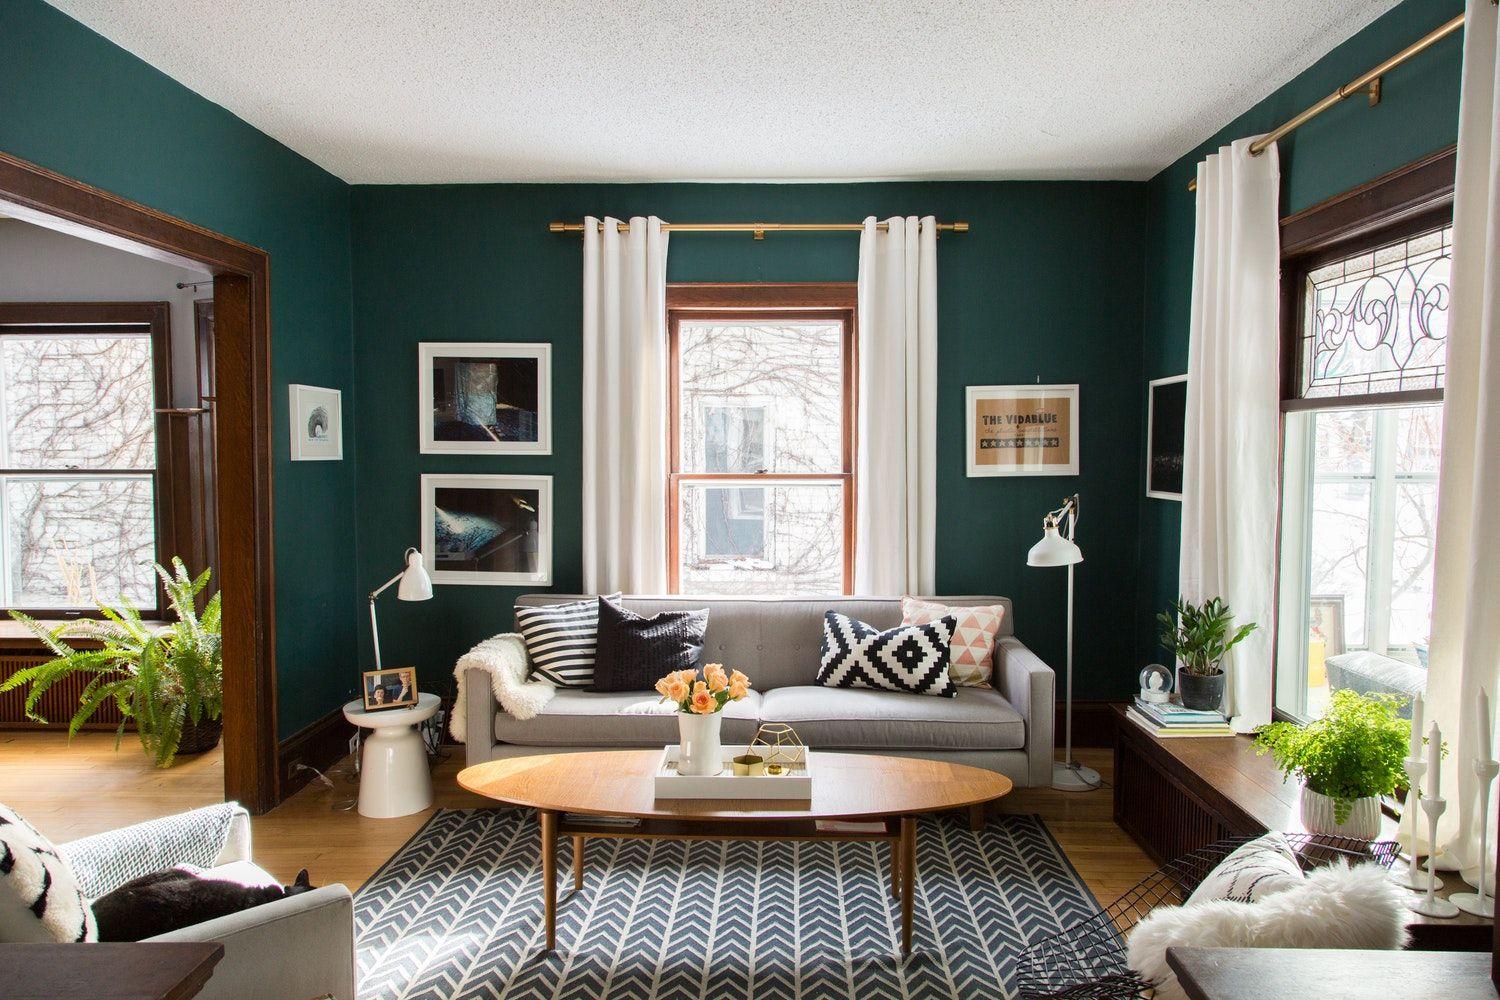 5 Smart Steps To Give A Stylist Look To Your House